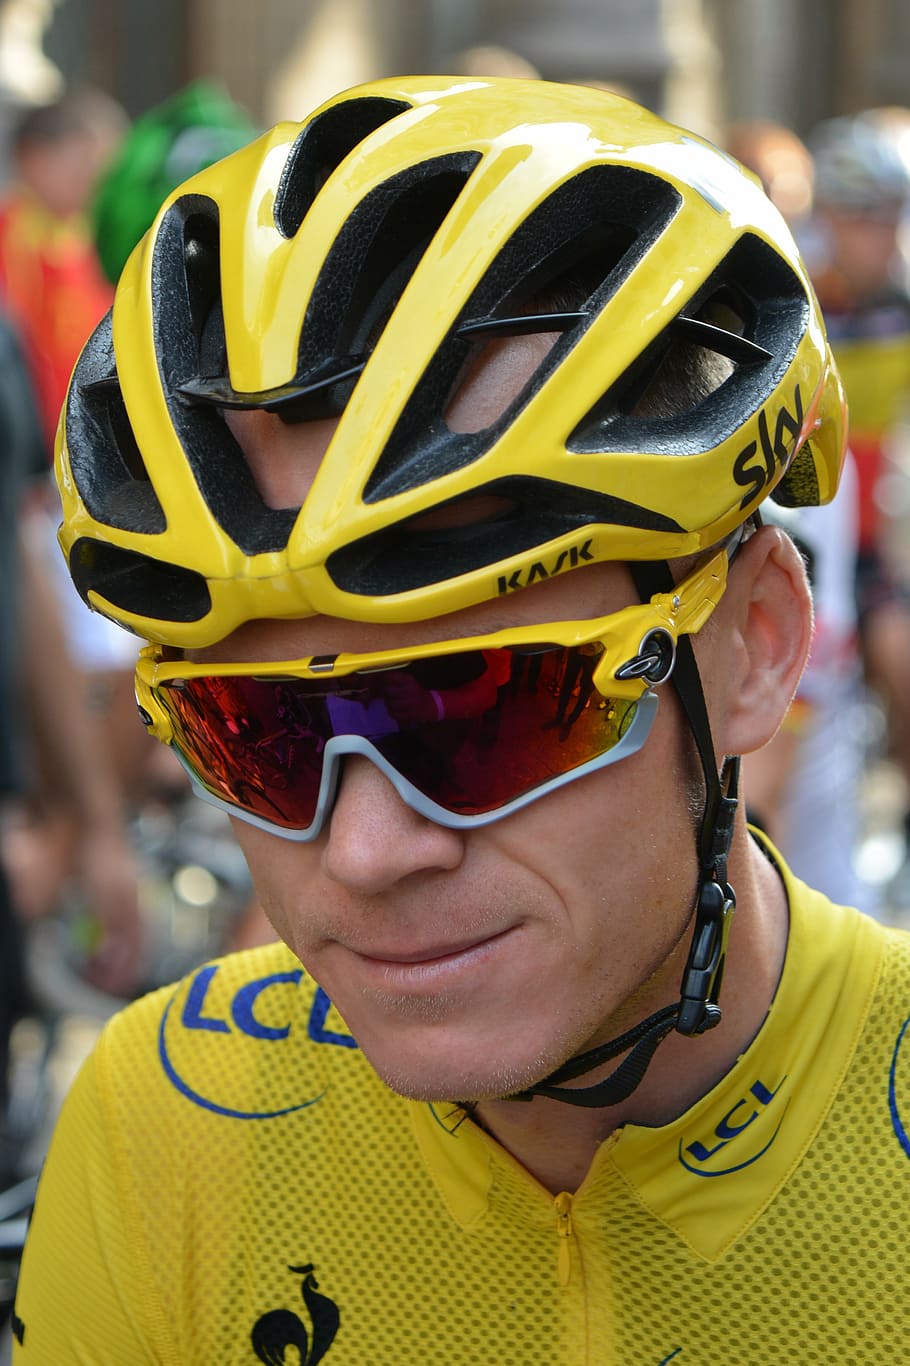 chris froome, champion, yellow jersey, celebrity, cyclist, professional road bicycle racer, man, people, winner, headshot